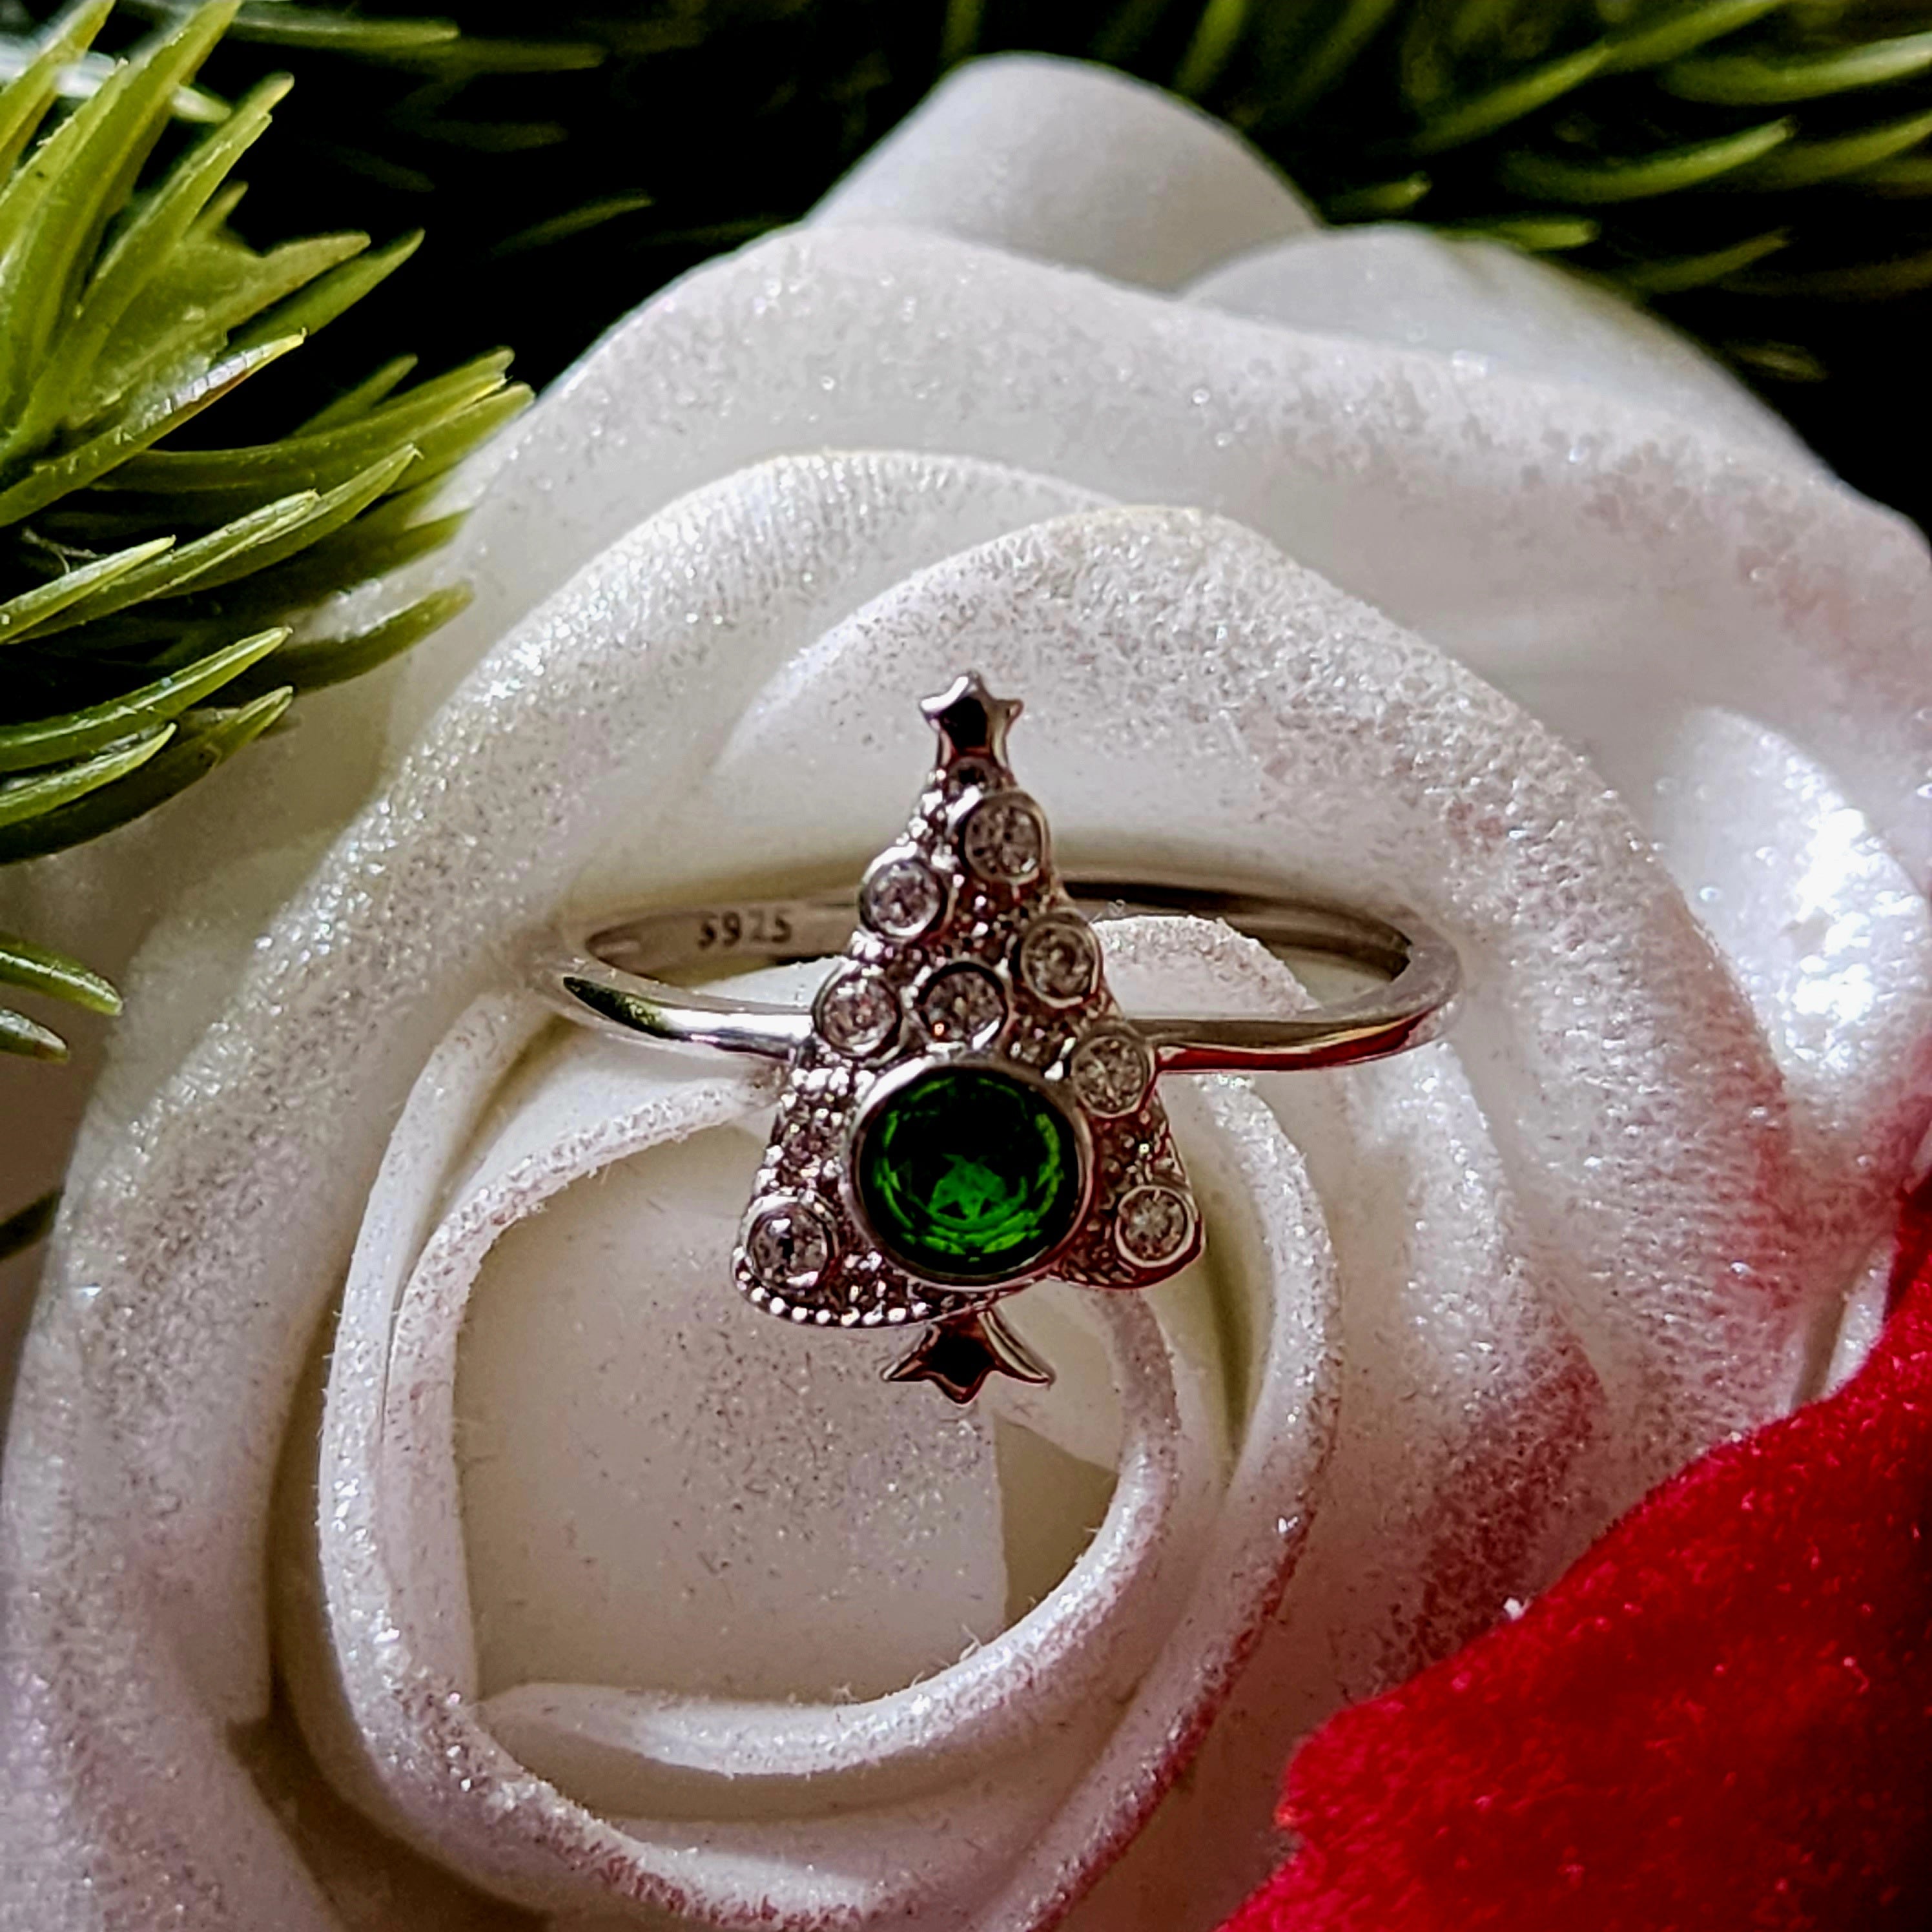 Chrome Diopside Tree Adjustable Ring .925 Silver for Emotional Healing and Forgiveness